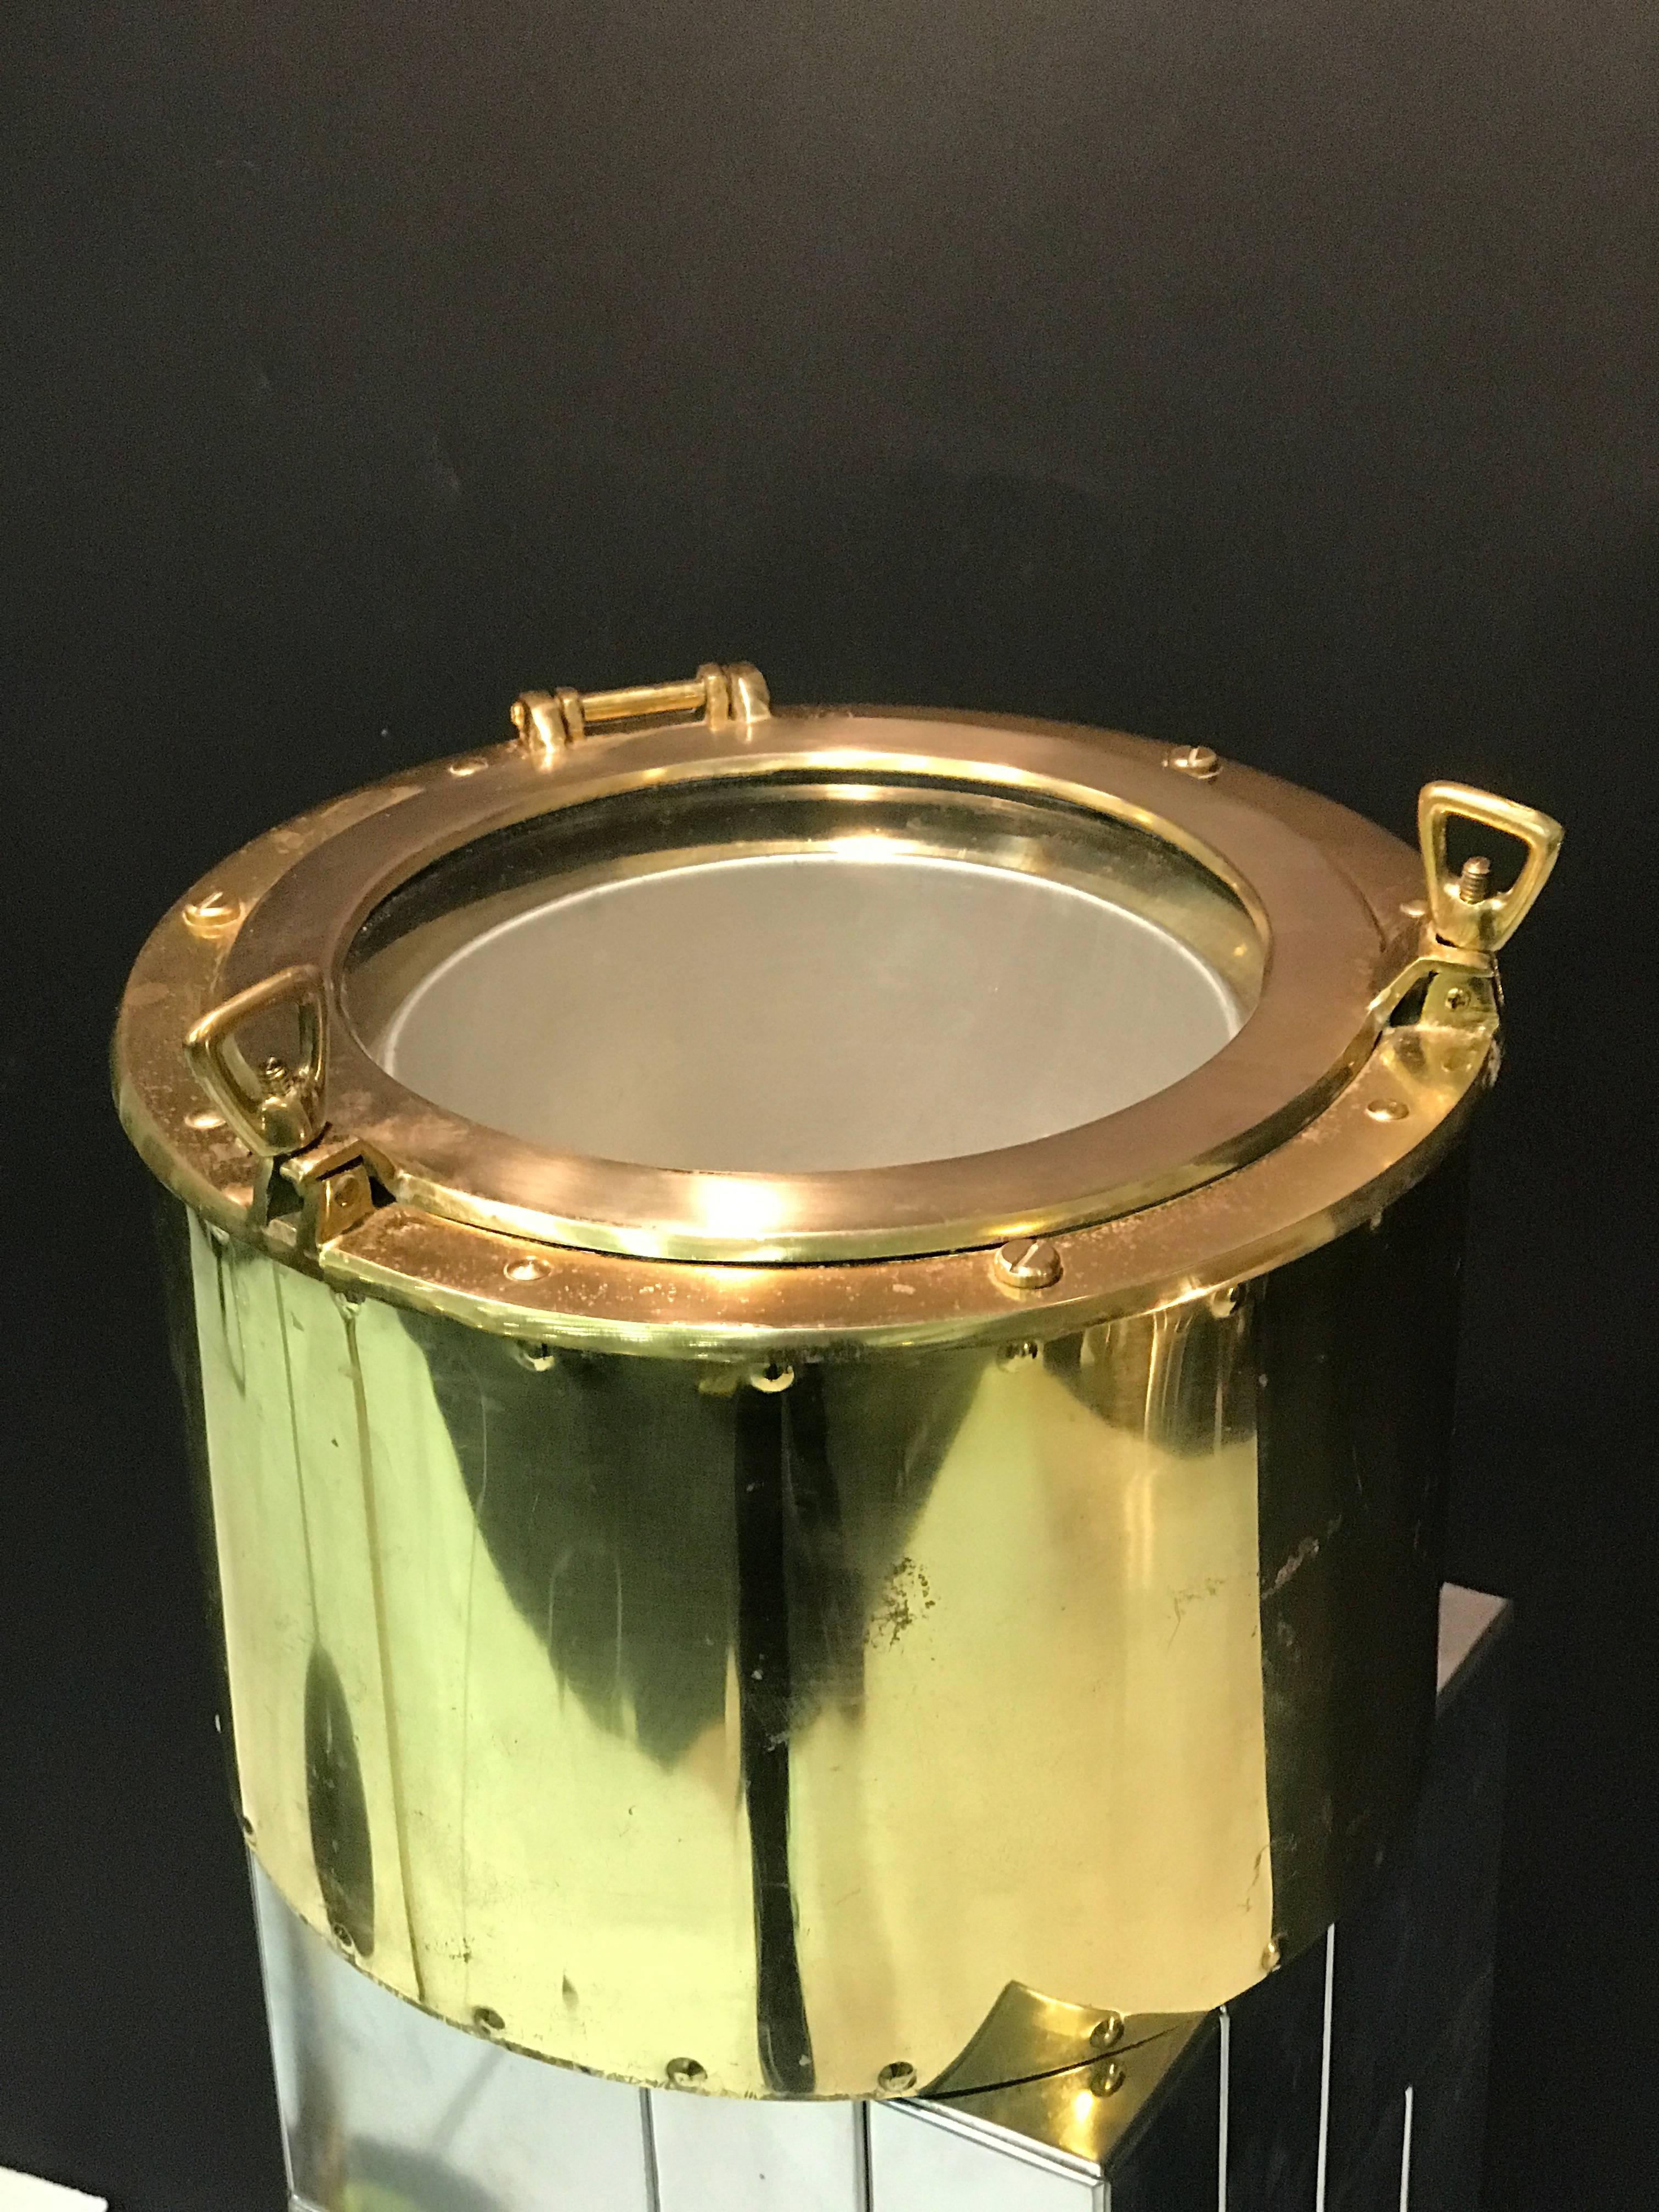 A rare yacht or boat themed brass porthole ice bucket, circa 1970. Great vintage condition with some wear appropriate with age.